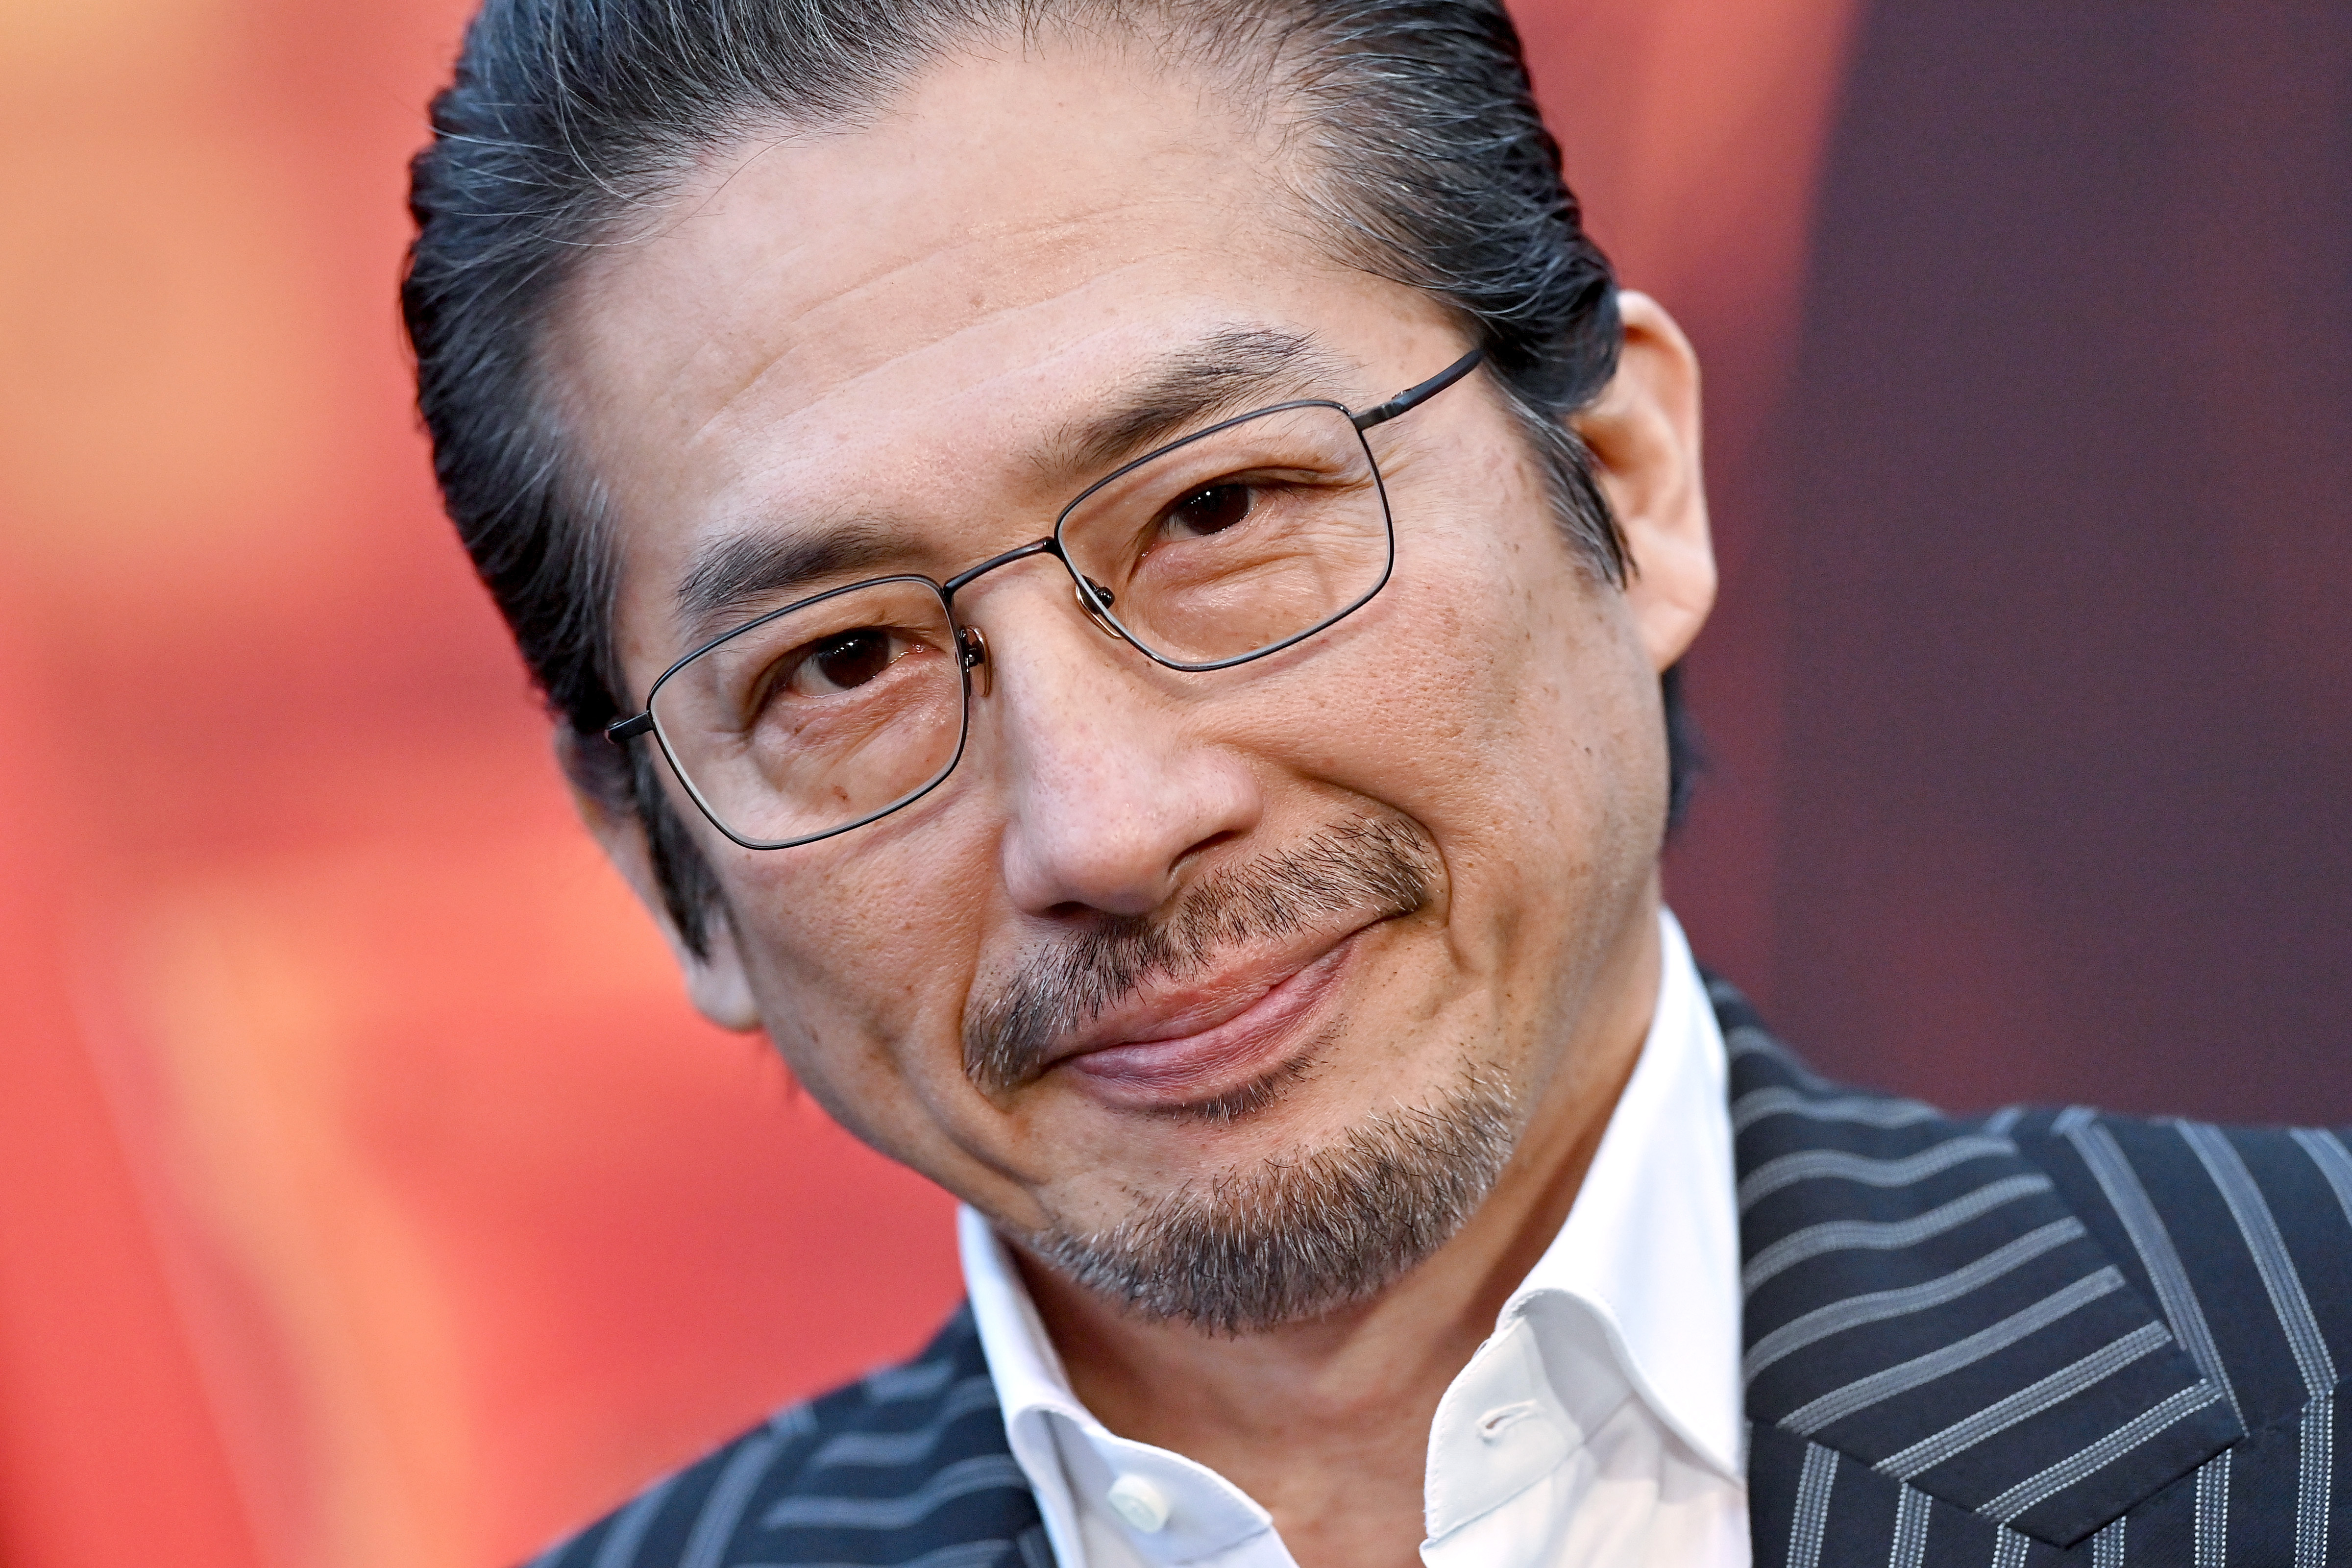 Hiroyuki Sanada at TCL Chinese Theatre on March 20, 2023, in Hollywood, California. | Source: Getty Images